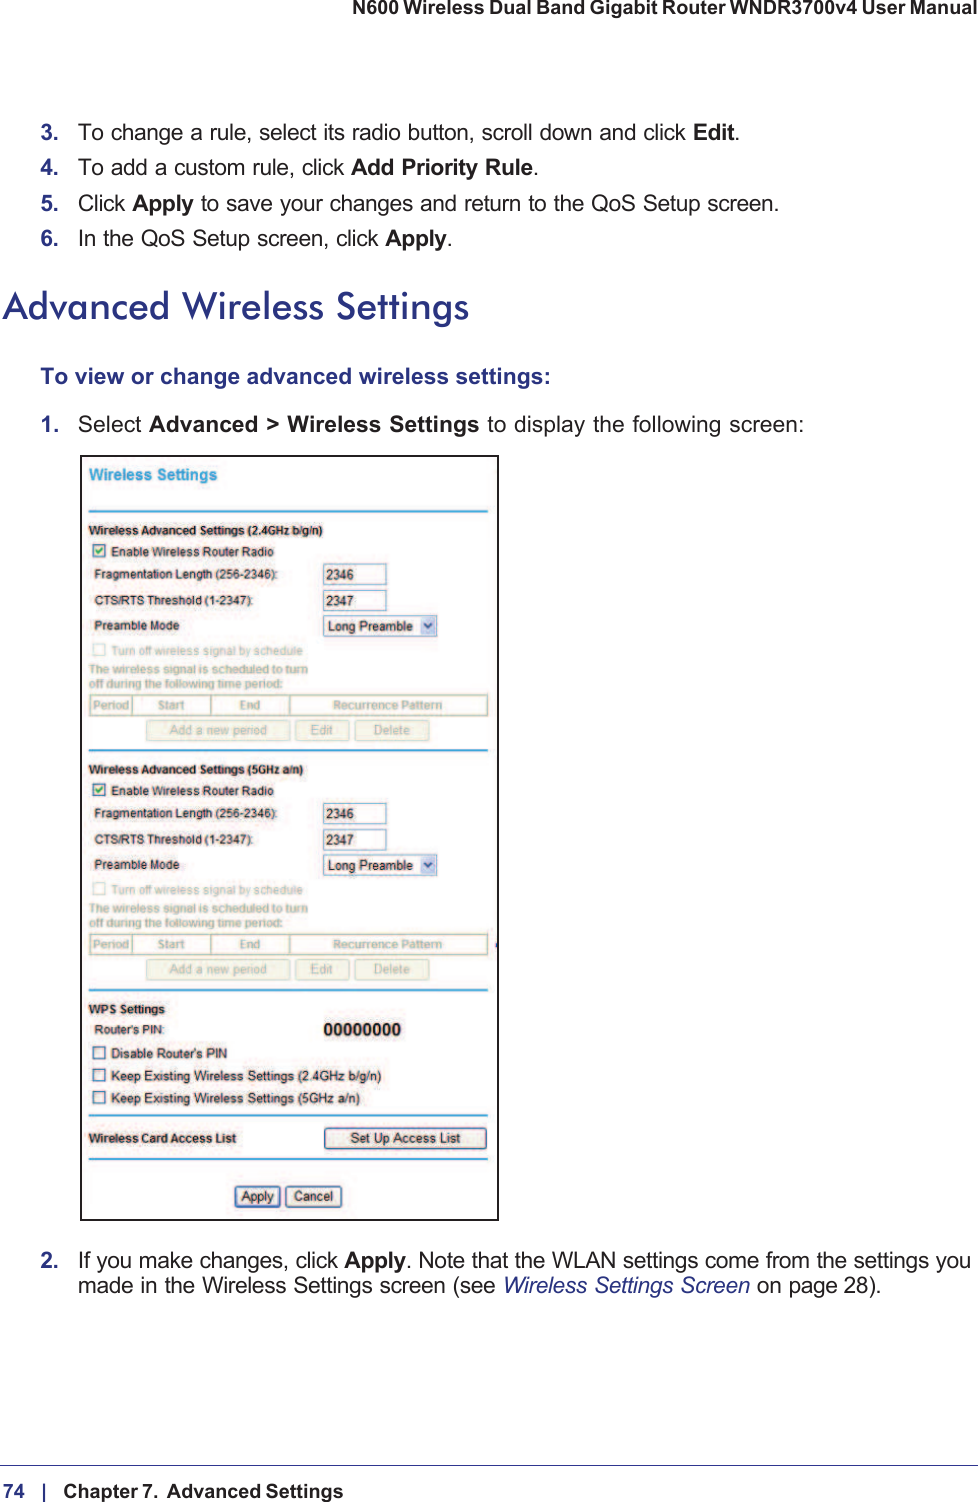 74 |    Chapter 7.  Advanced Settings N600 Wireless Dual Band Gigabit Router WNDR3700v4 User Manual 3. To change a rule, select its radio button, scroll down and click Edit.4. To add a custom rule, click Add Priority Rule.5. Click Apply to save your changes and return to the QoS Setup screen.6. In the QoS Setup screen, click Apply.Advanced Wireless SettingsTo view or change advanced wireless settings:1.Select Advanced &gt; Wireless Settings to display the following screen:2. If you make changes, click Apply. Note that the WLAN settings come from the settings you made in the Wireless Settings screen (see Wireless Settings Screen on page  28).